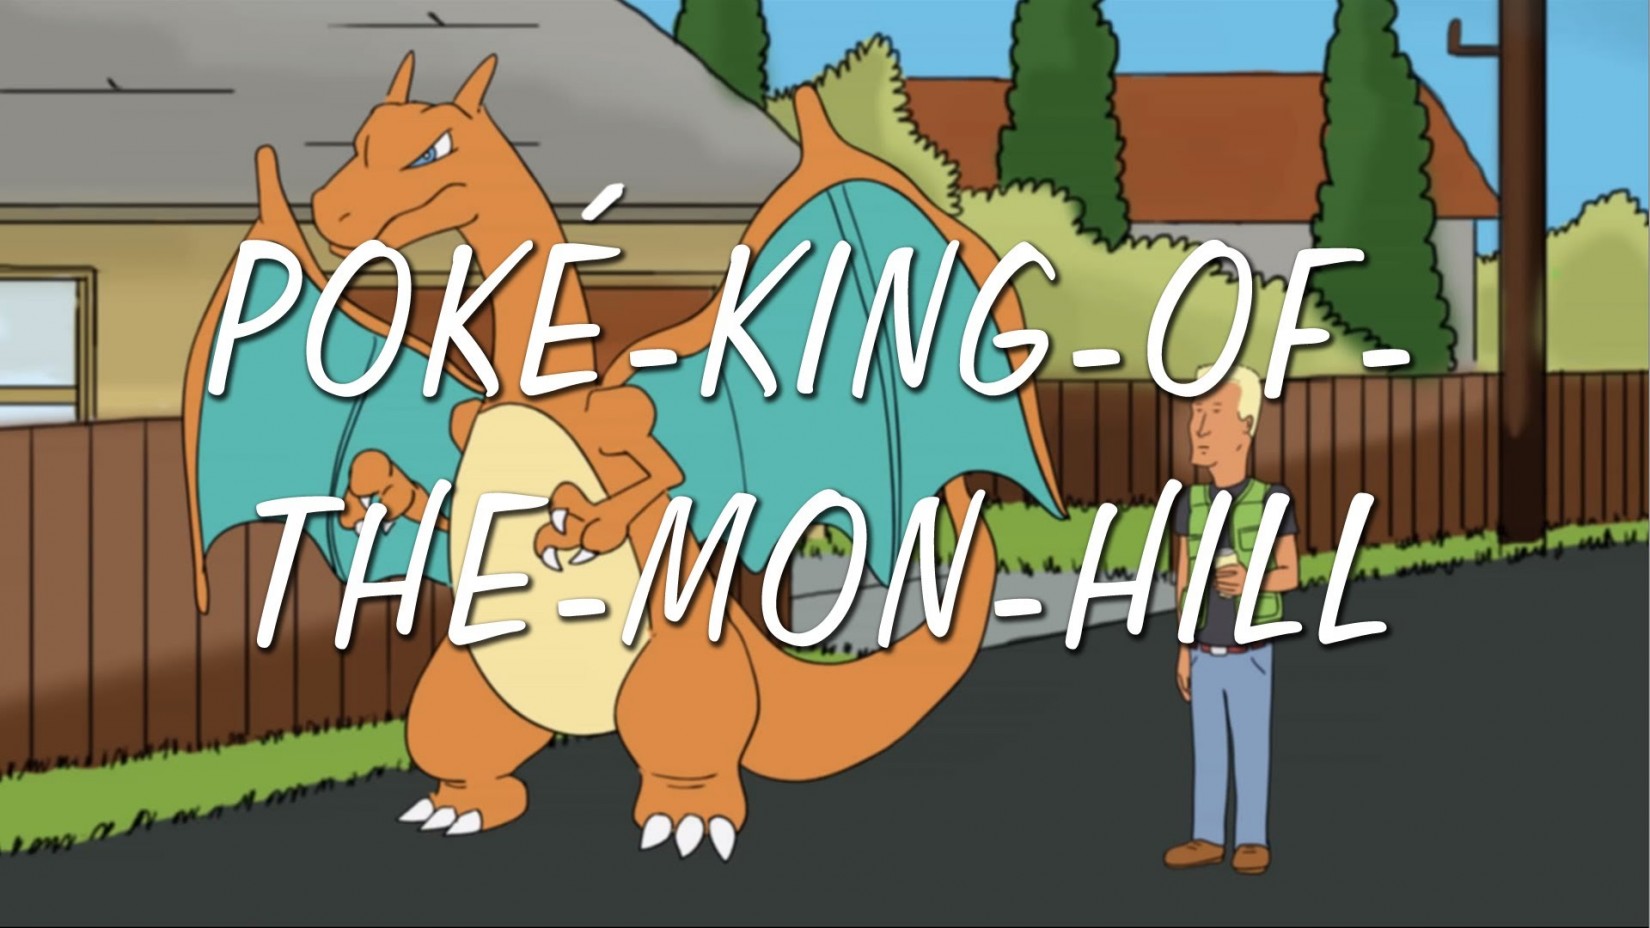 King Of The Hill Font? - Forum | Dafont.com